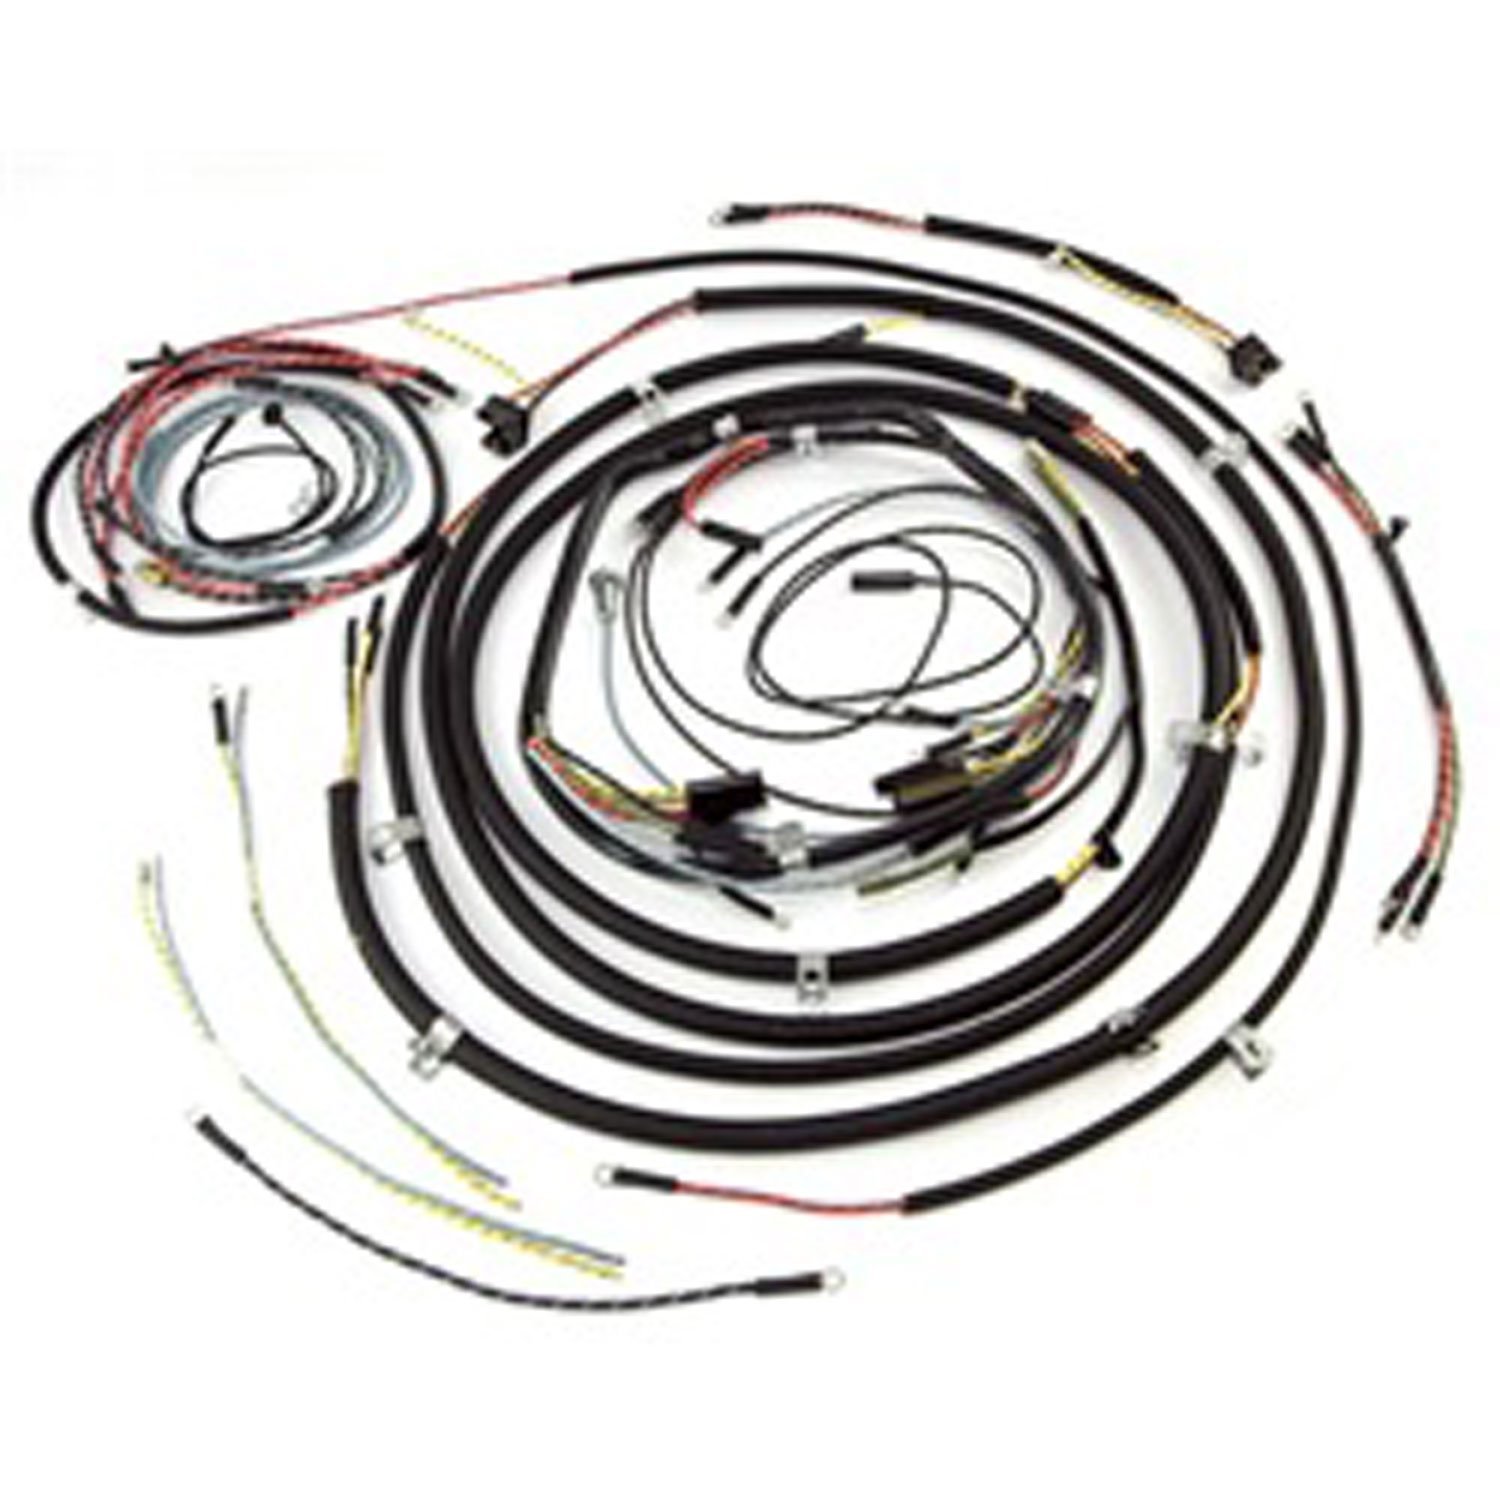 This complete wiring harness with cloth wire cover from Omix-ADA fits 53-56 Willys CJ3B.